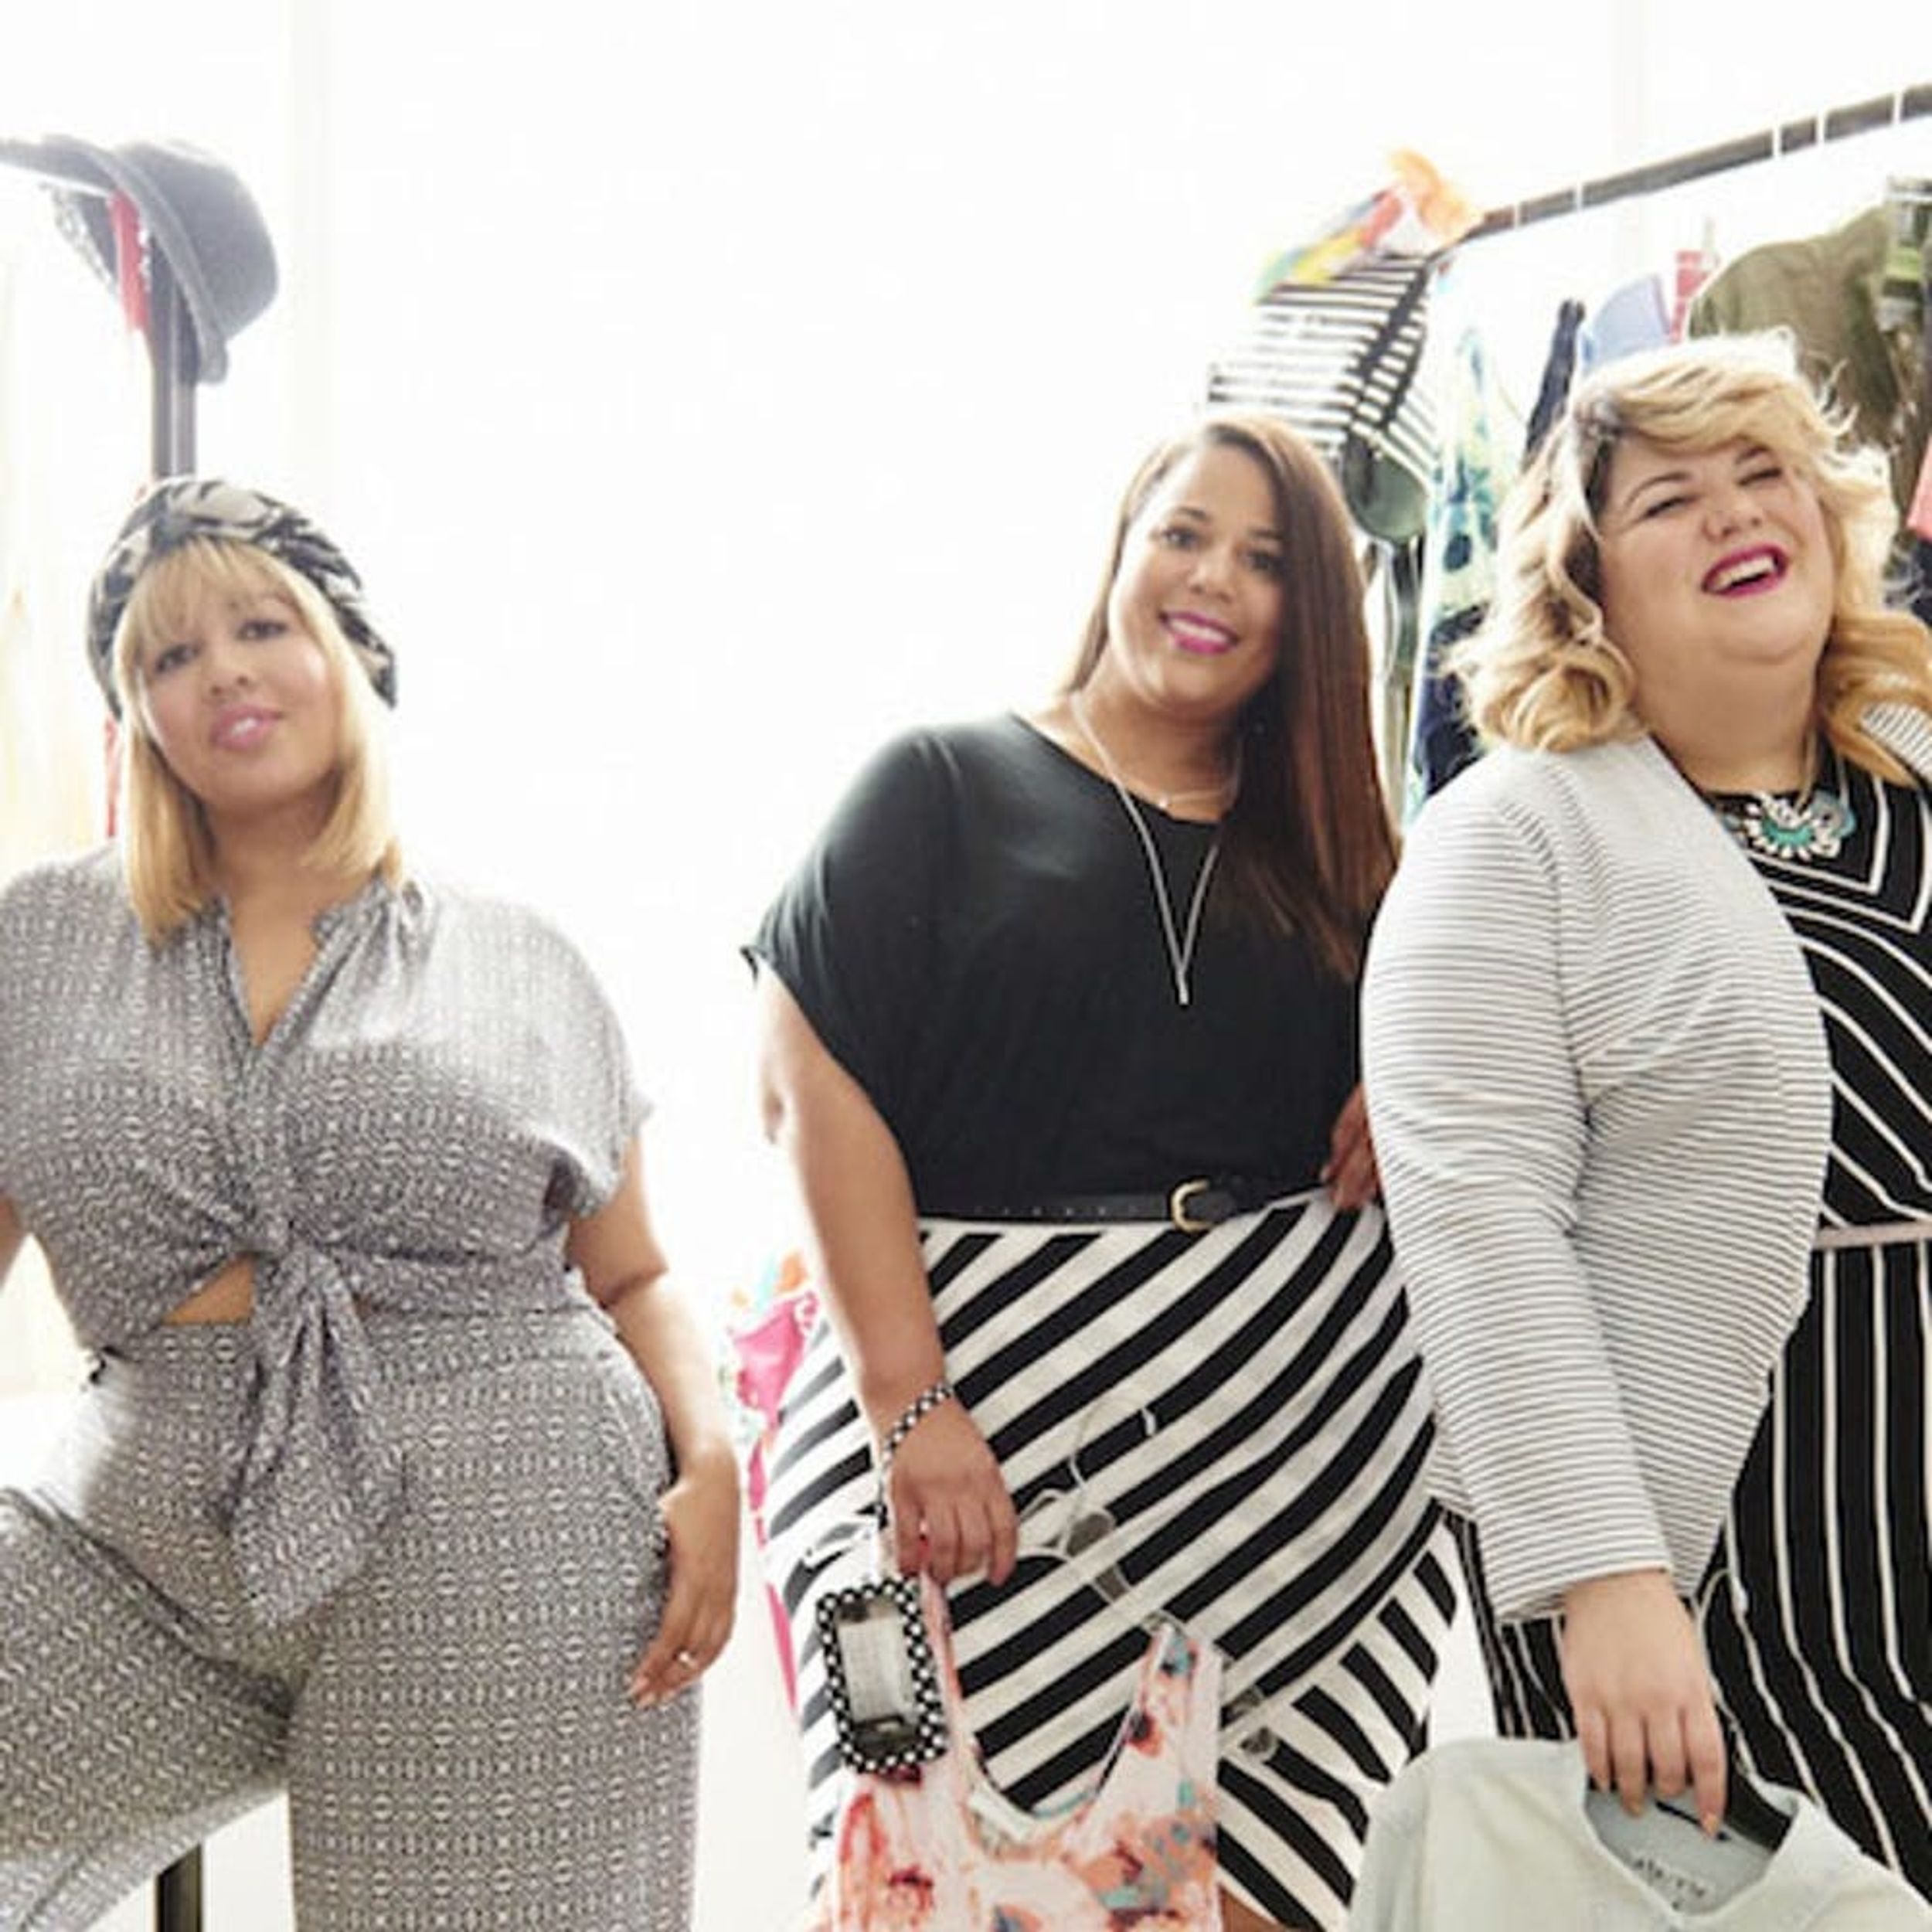 Prepare to Swoon Over Target’s New Plus-Size Line